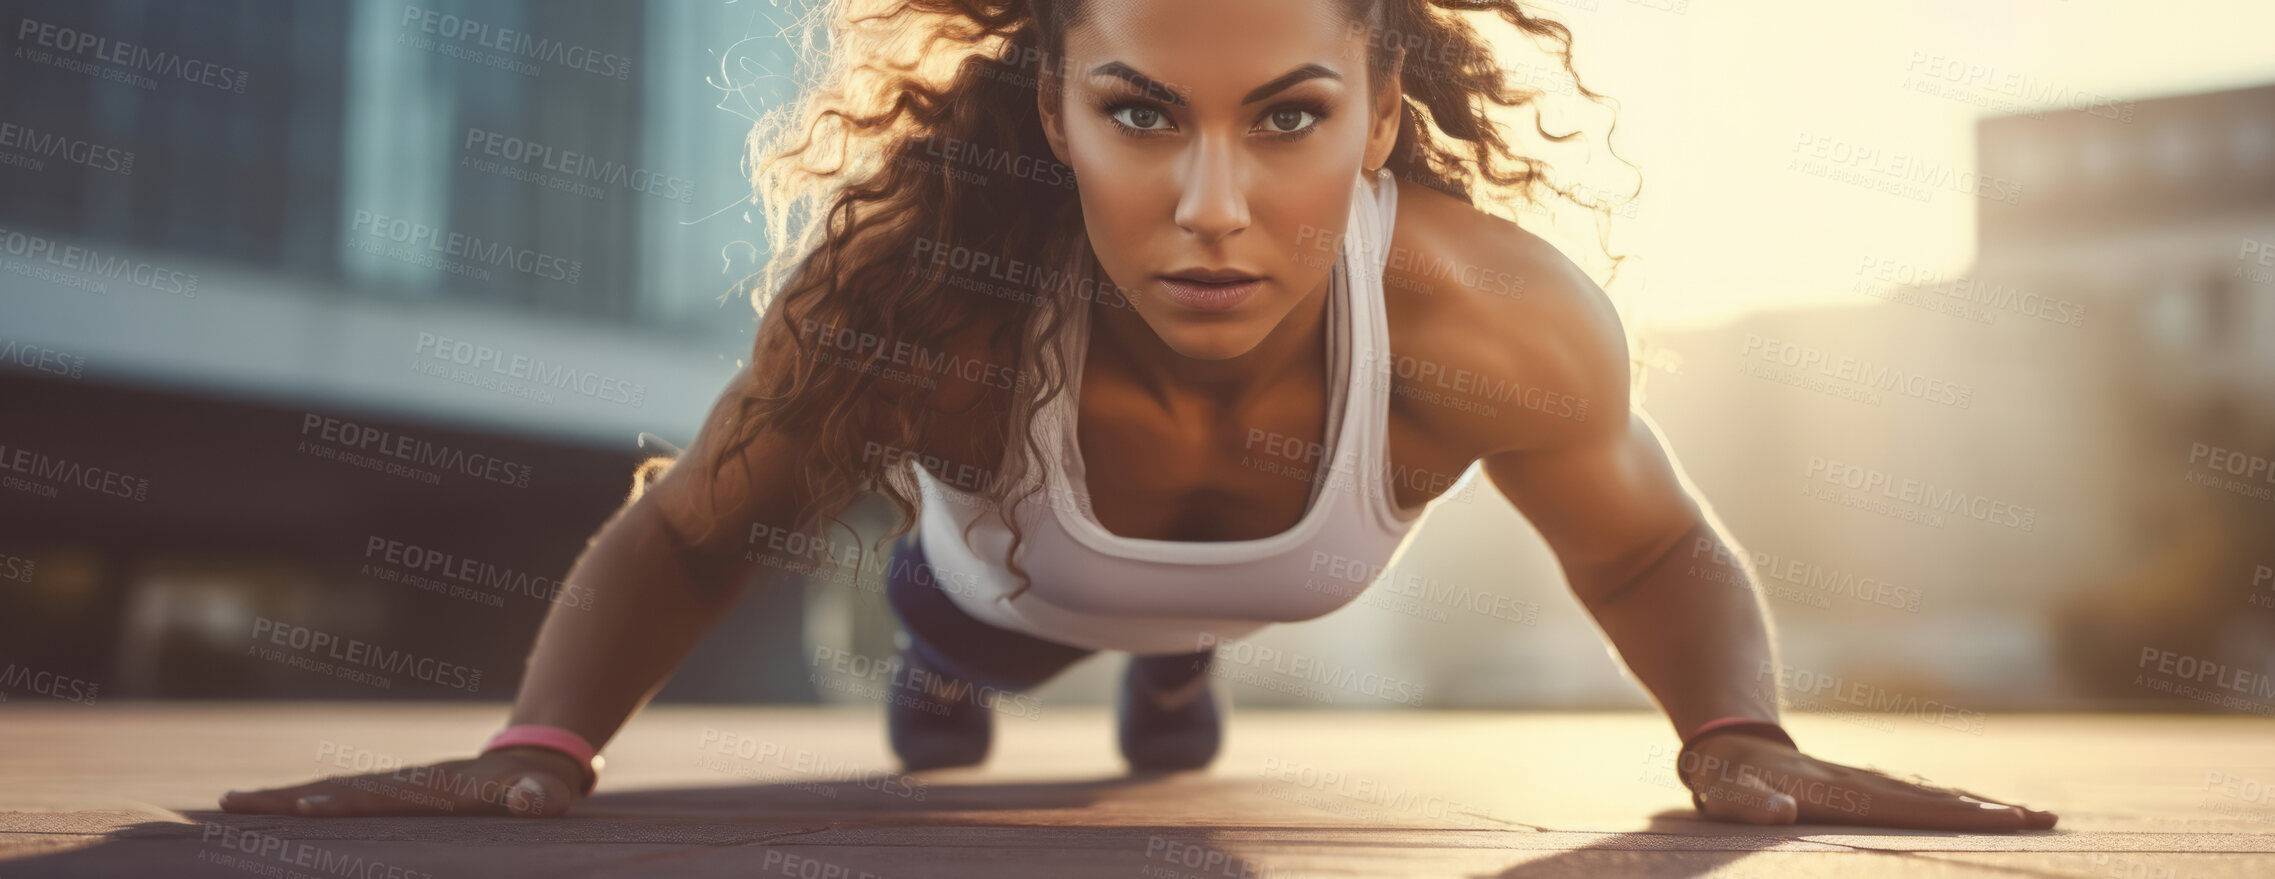 Buy stock photo Fit woman plank posing in urban area. Athletic woman. Fitness concept.